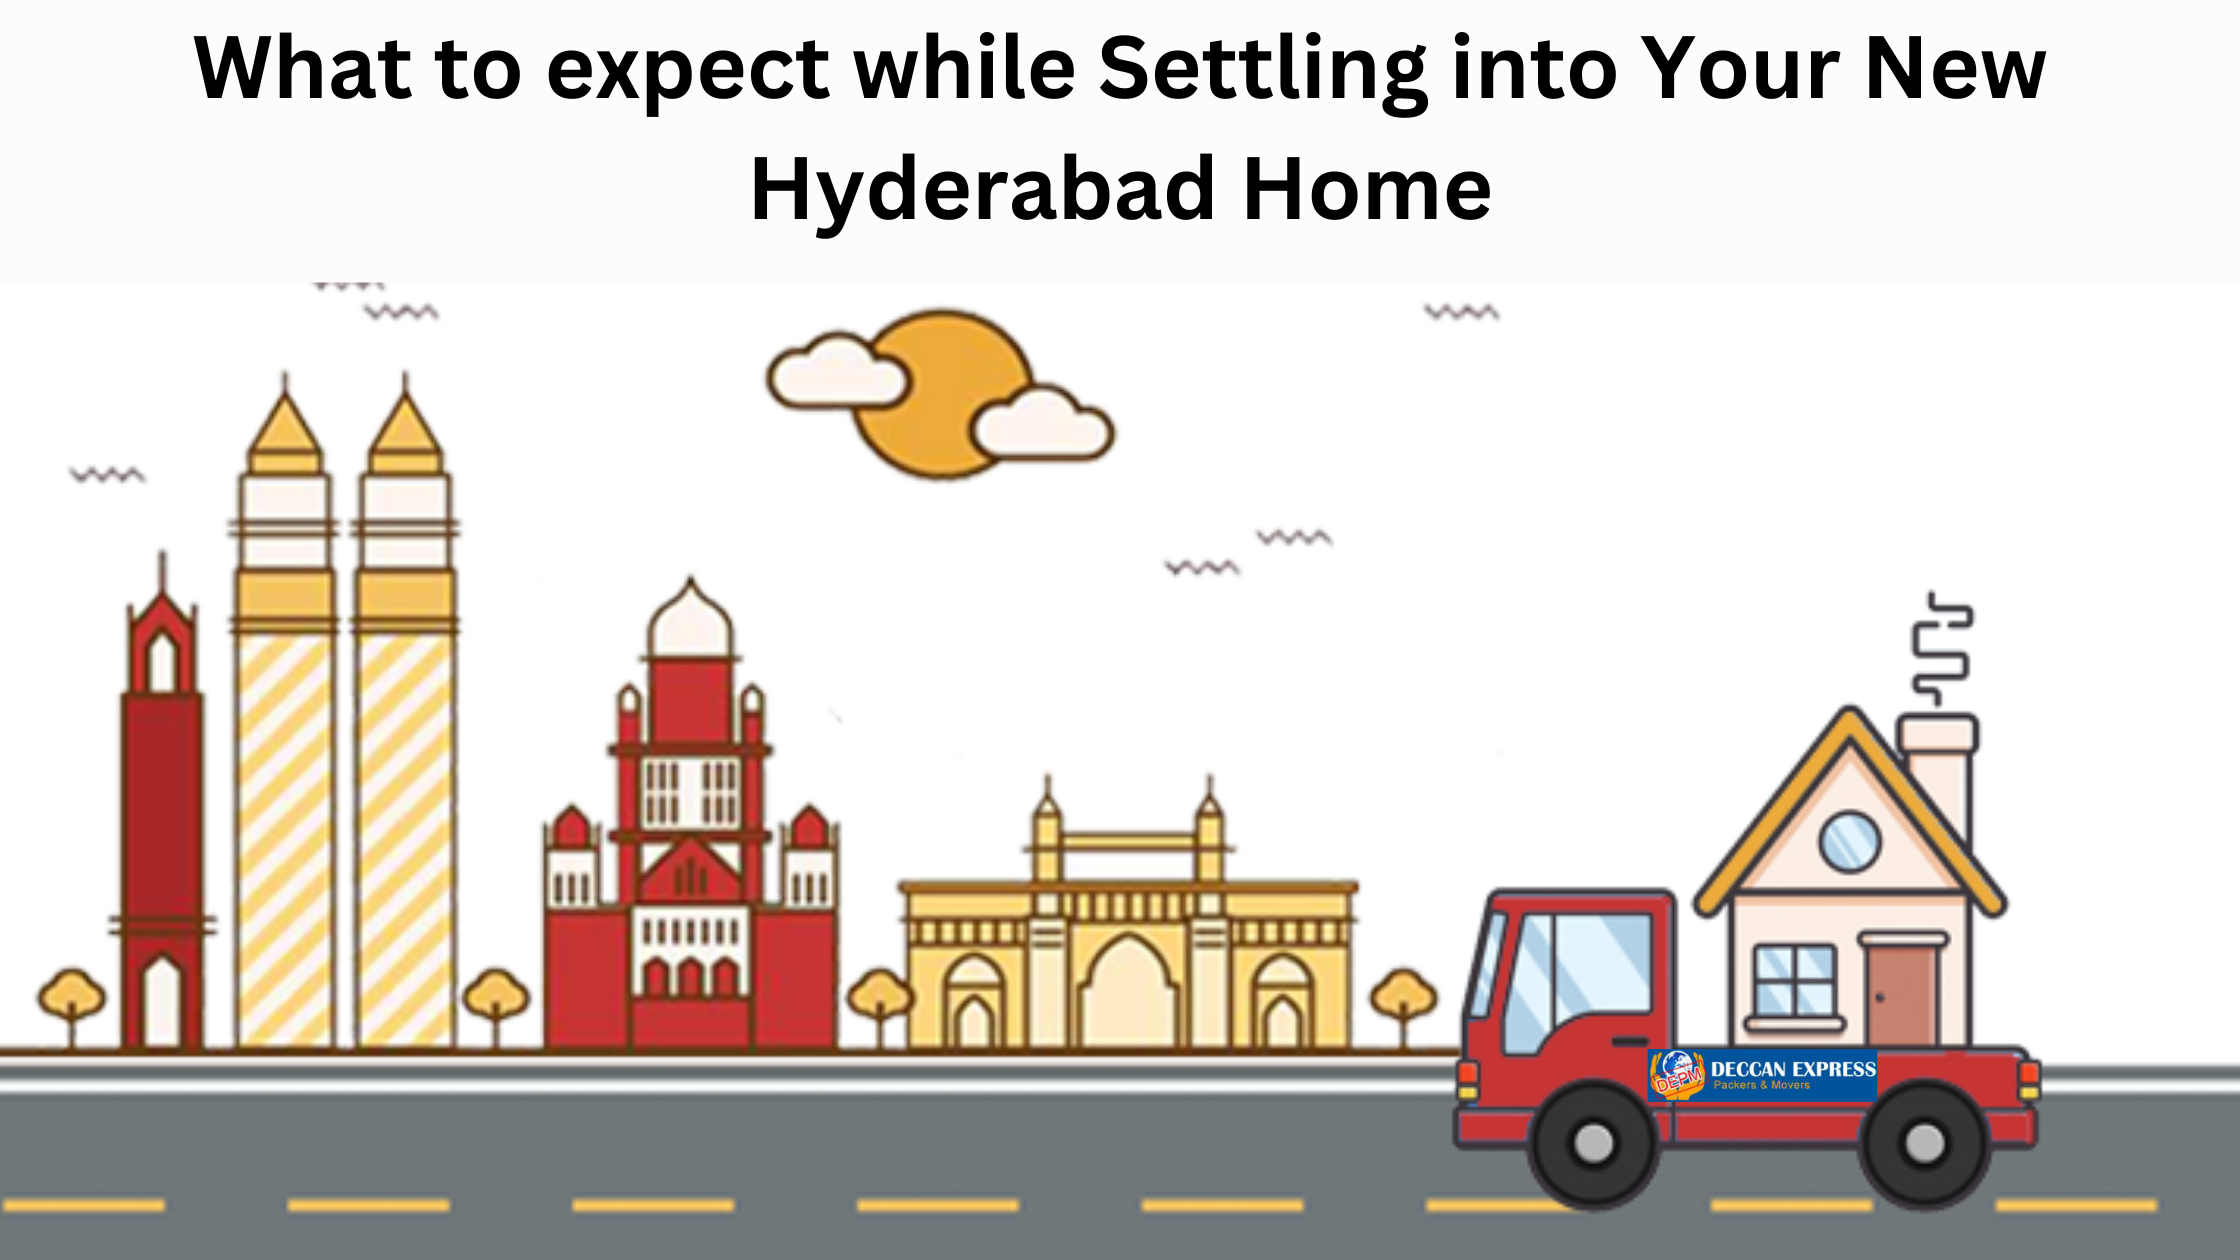 What to expect while Settling into Your New Hyderabad Home